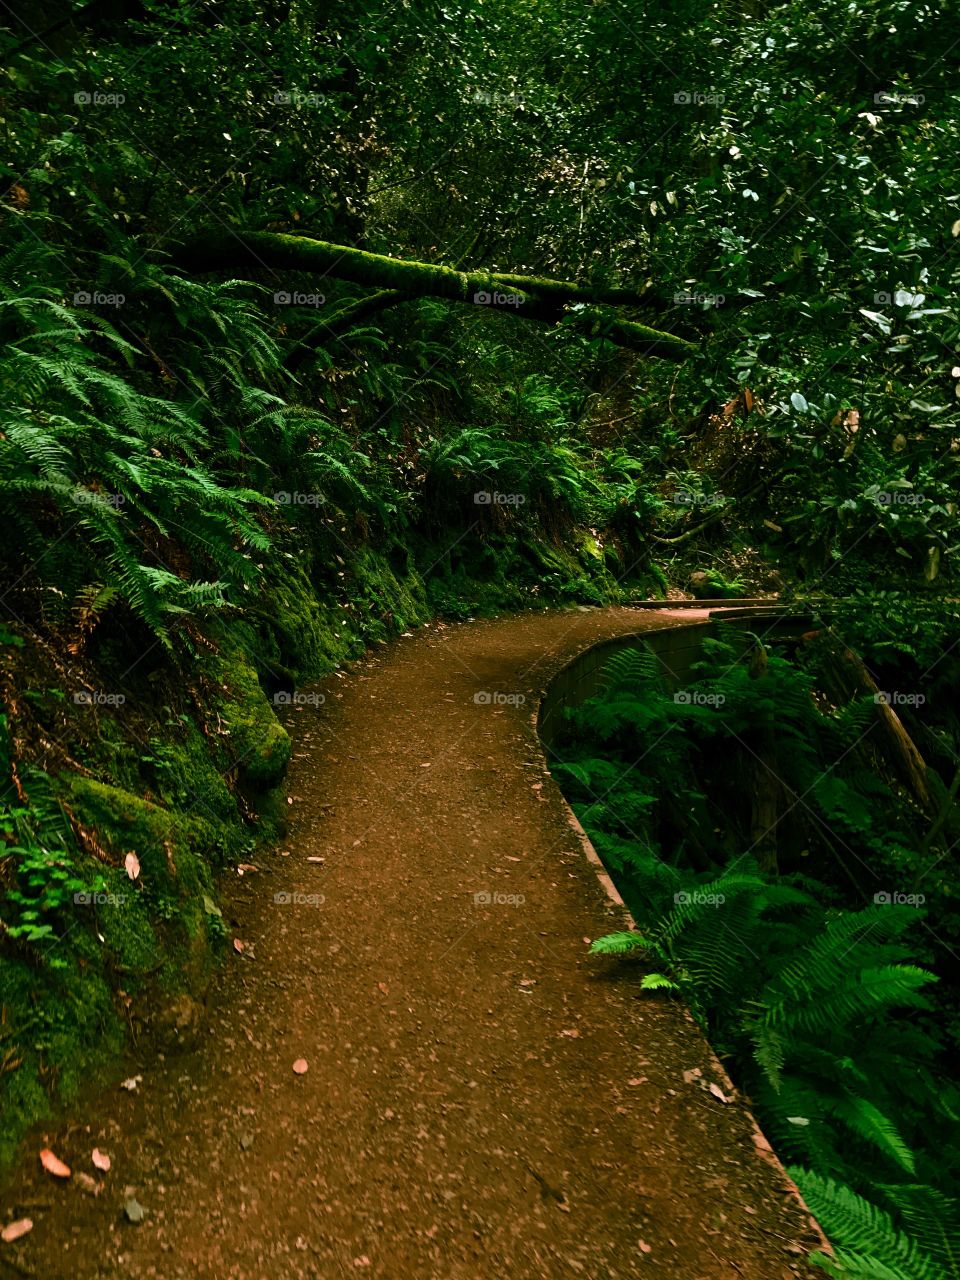 Hiking the beautiful trails of Muir Woods